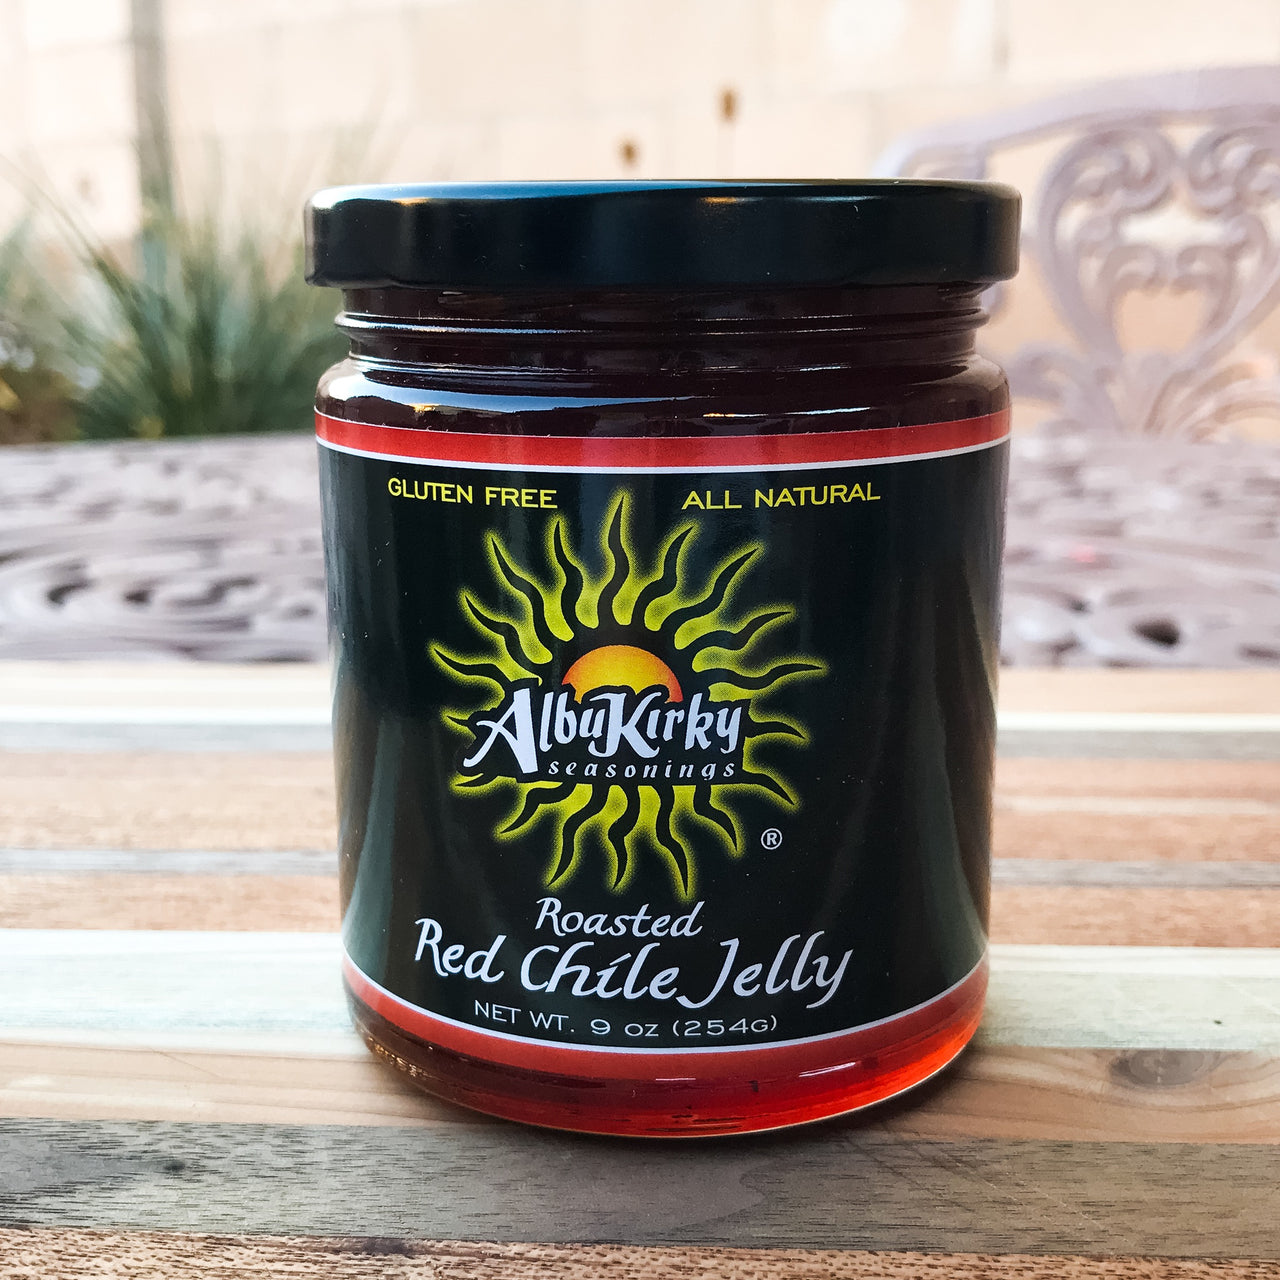 Roasted Red Chile Jelly 9oz jar